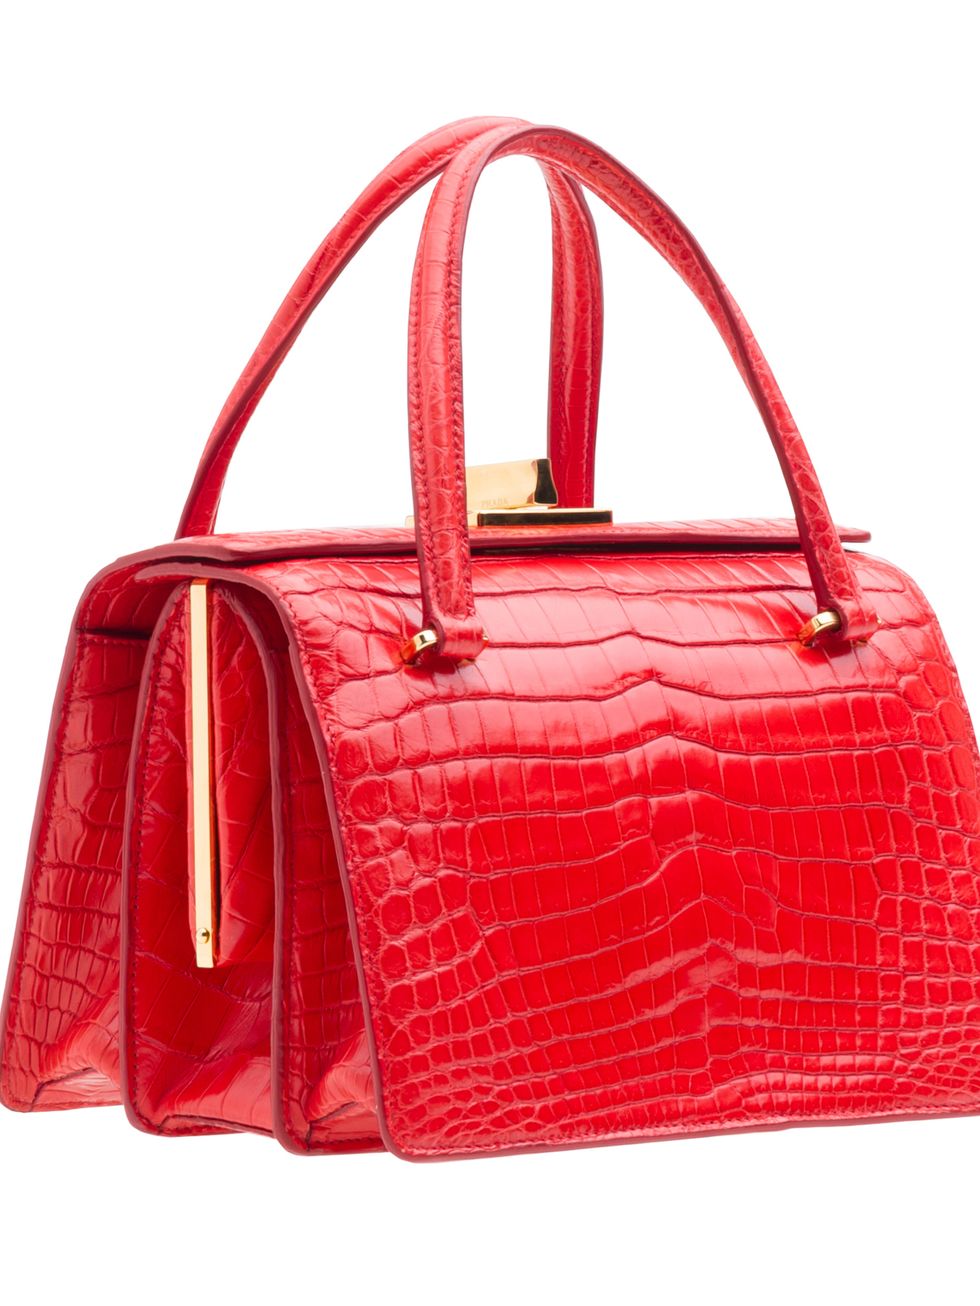 Product, Bag, Red, White, Fashion accessory, Style, Luggage and bags, Shoulder bag, Leather, Fashion, 